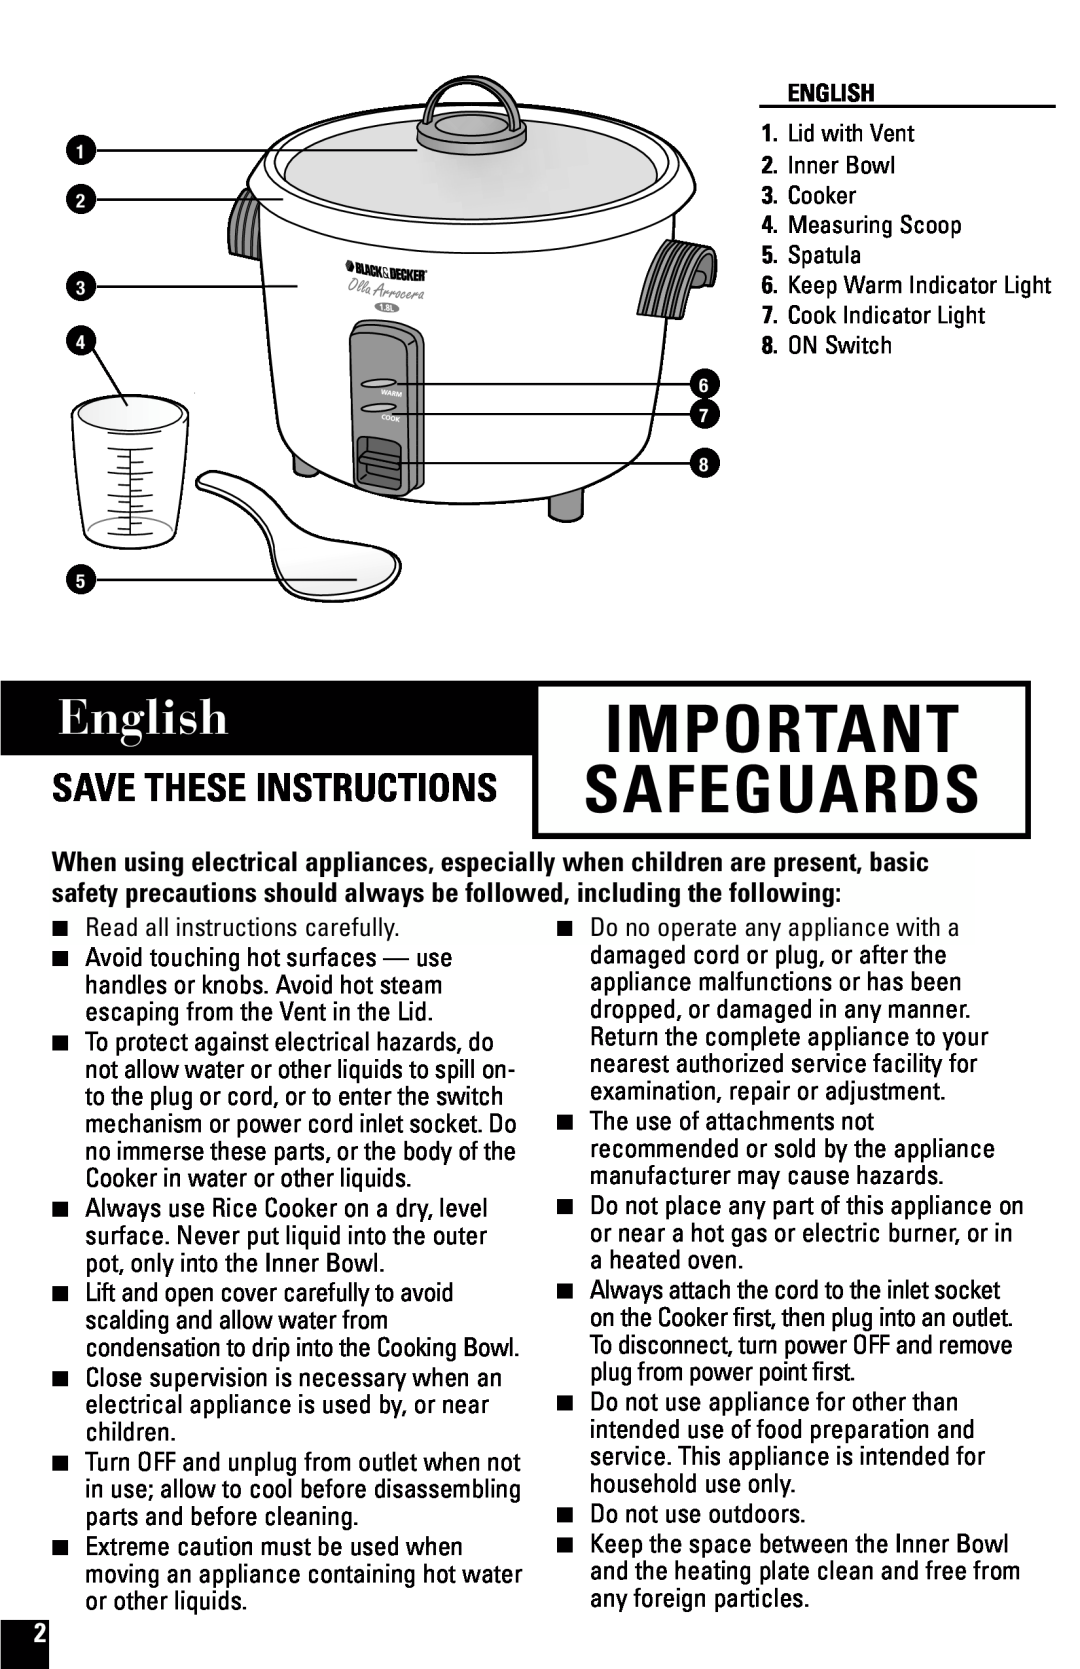 Black & Decker RC600 manual English, Safeguards, Save These Instructions 